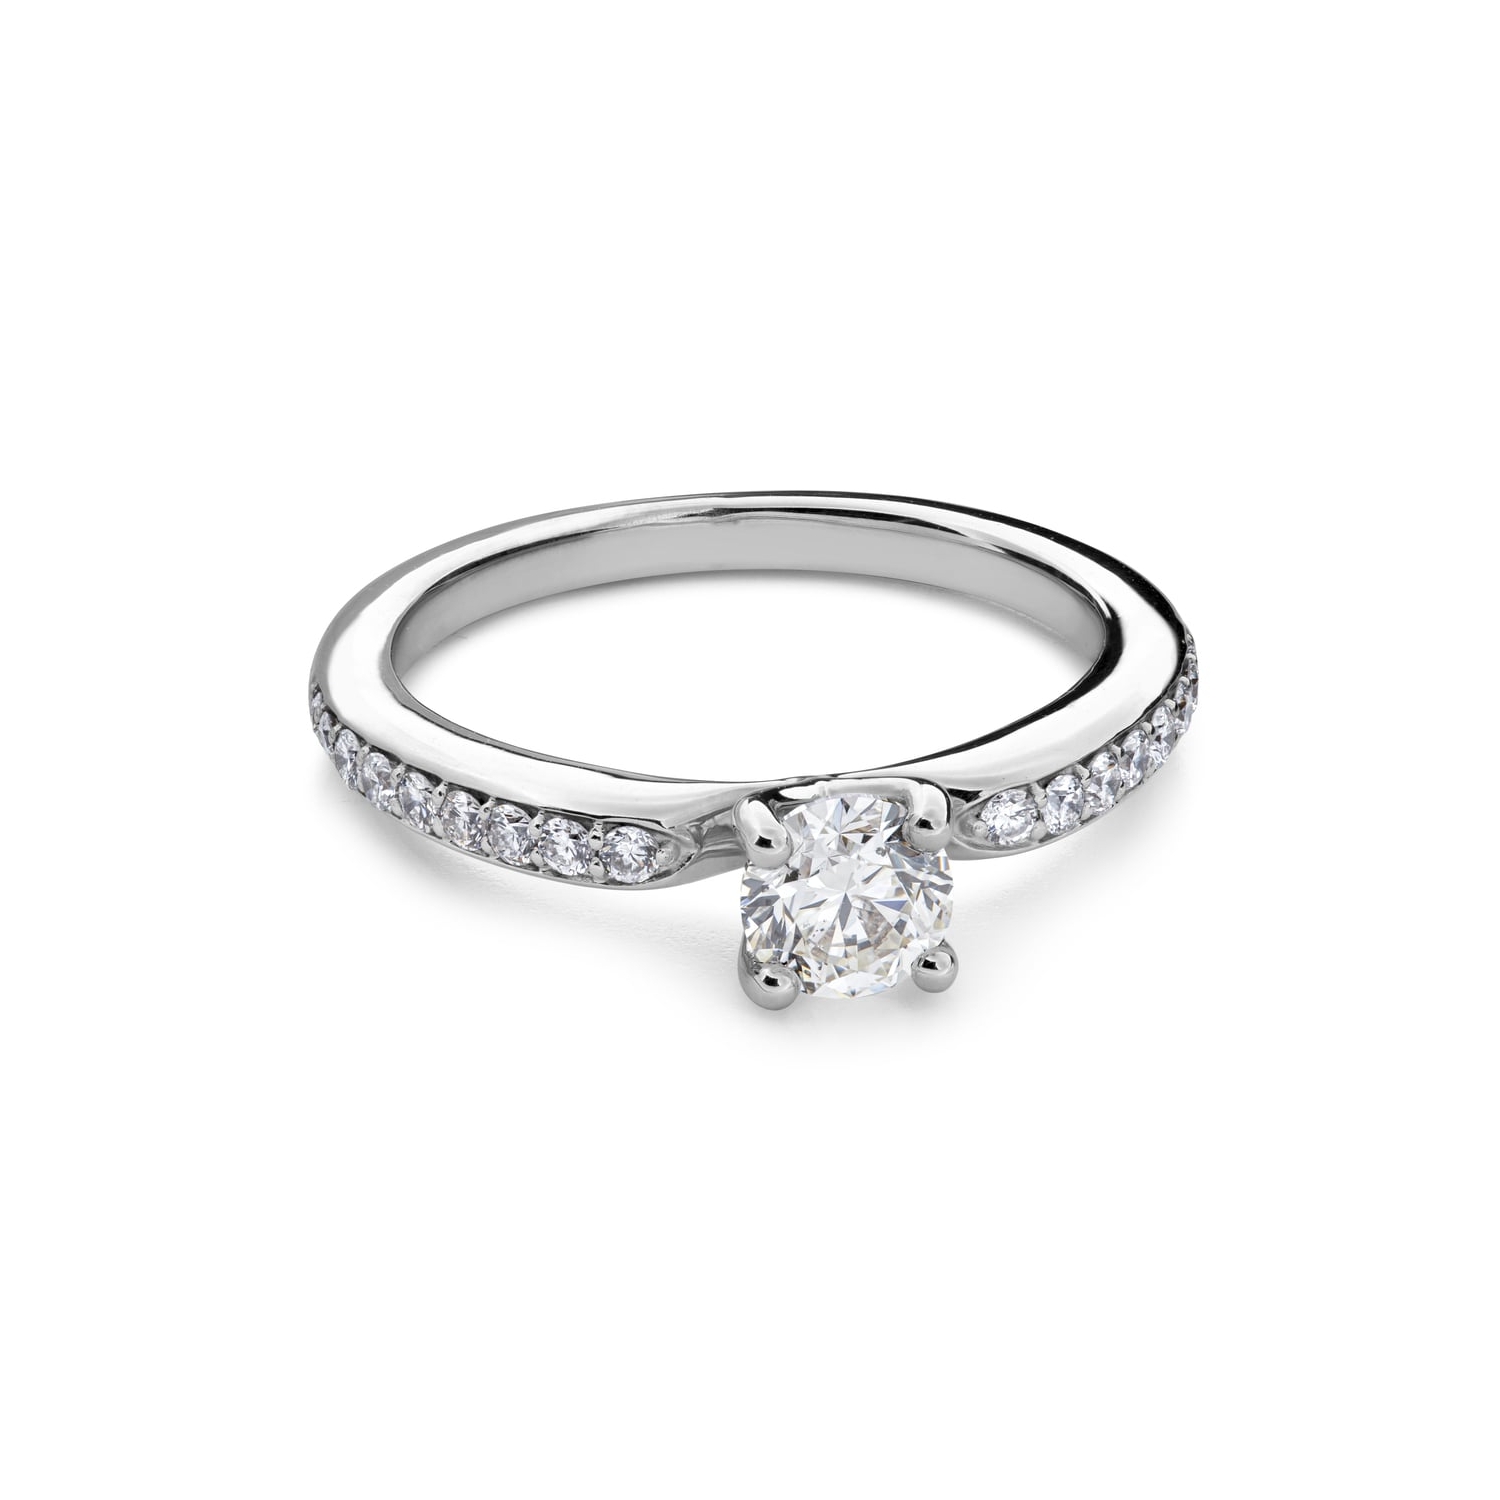 Engagment ring with brilliants "Crown 28"